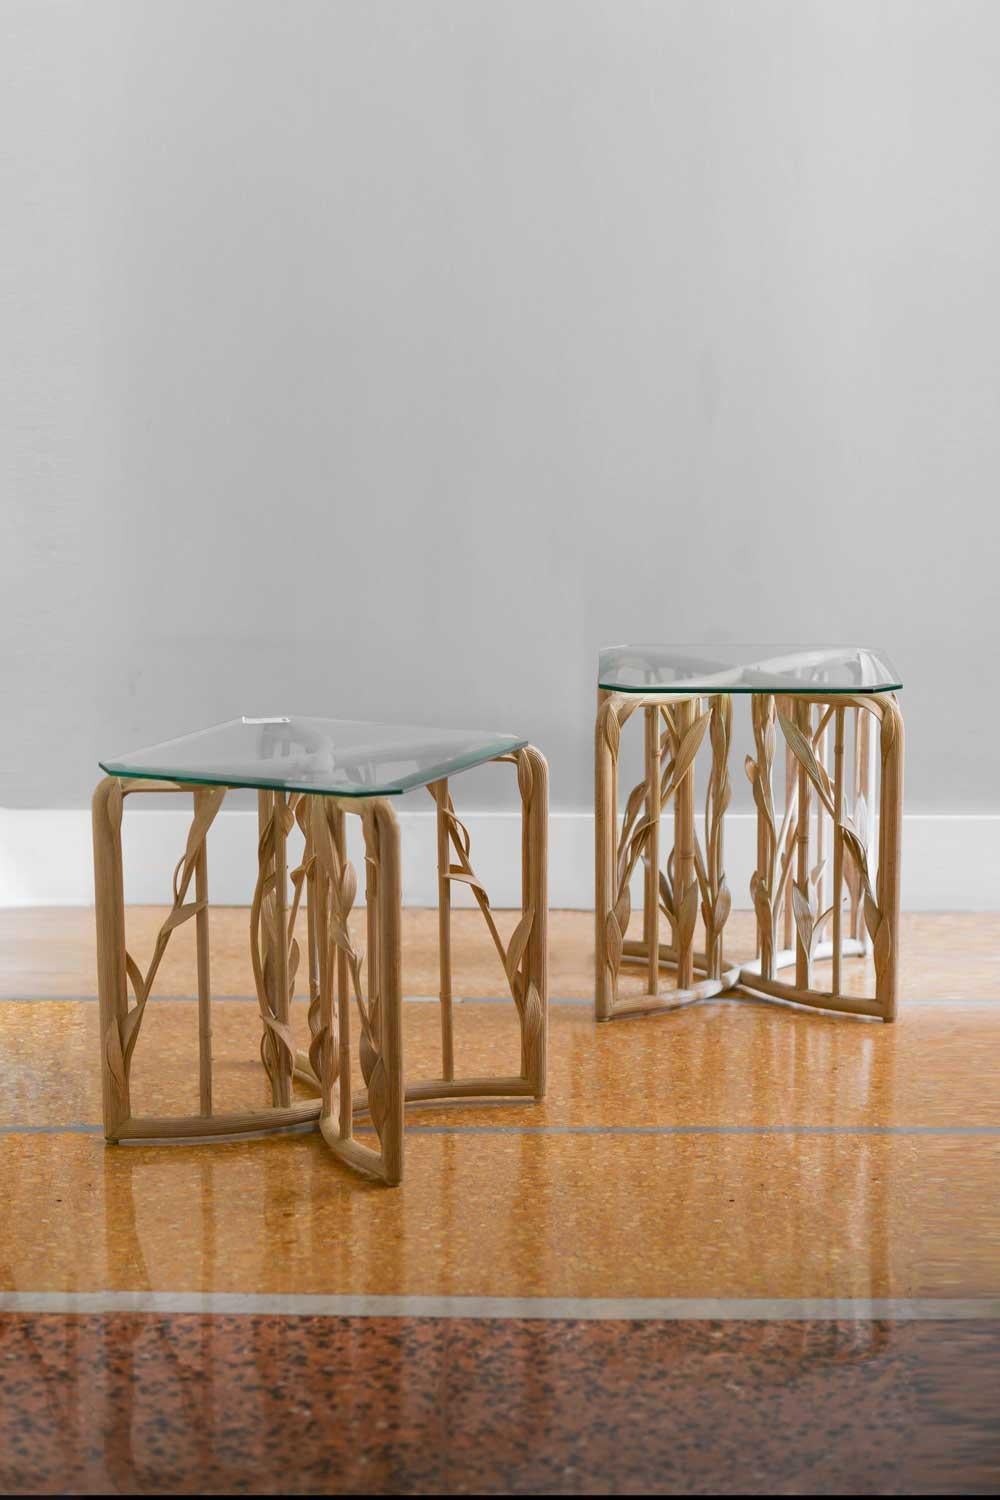 PAIR OF VIVAI DEL SUD COFFEE TABLES, 1970
Product details
Made of wood and glass.
Dimensions 50L x 57H x 50 D cm